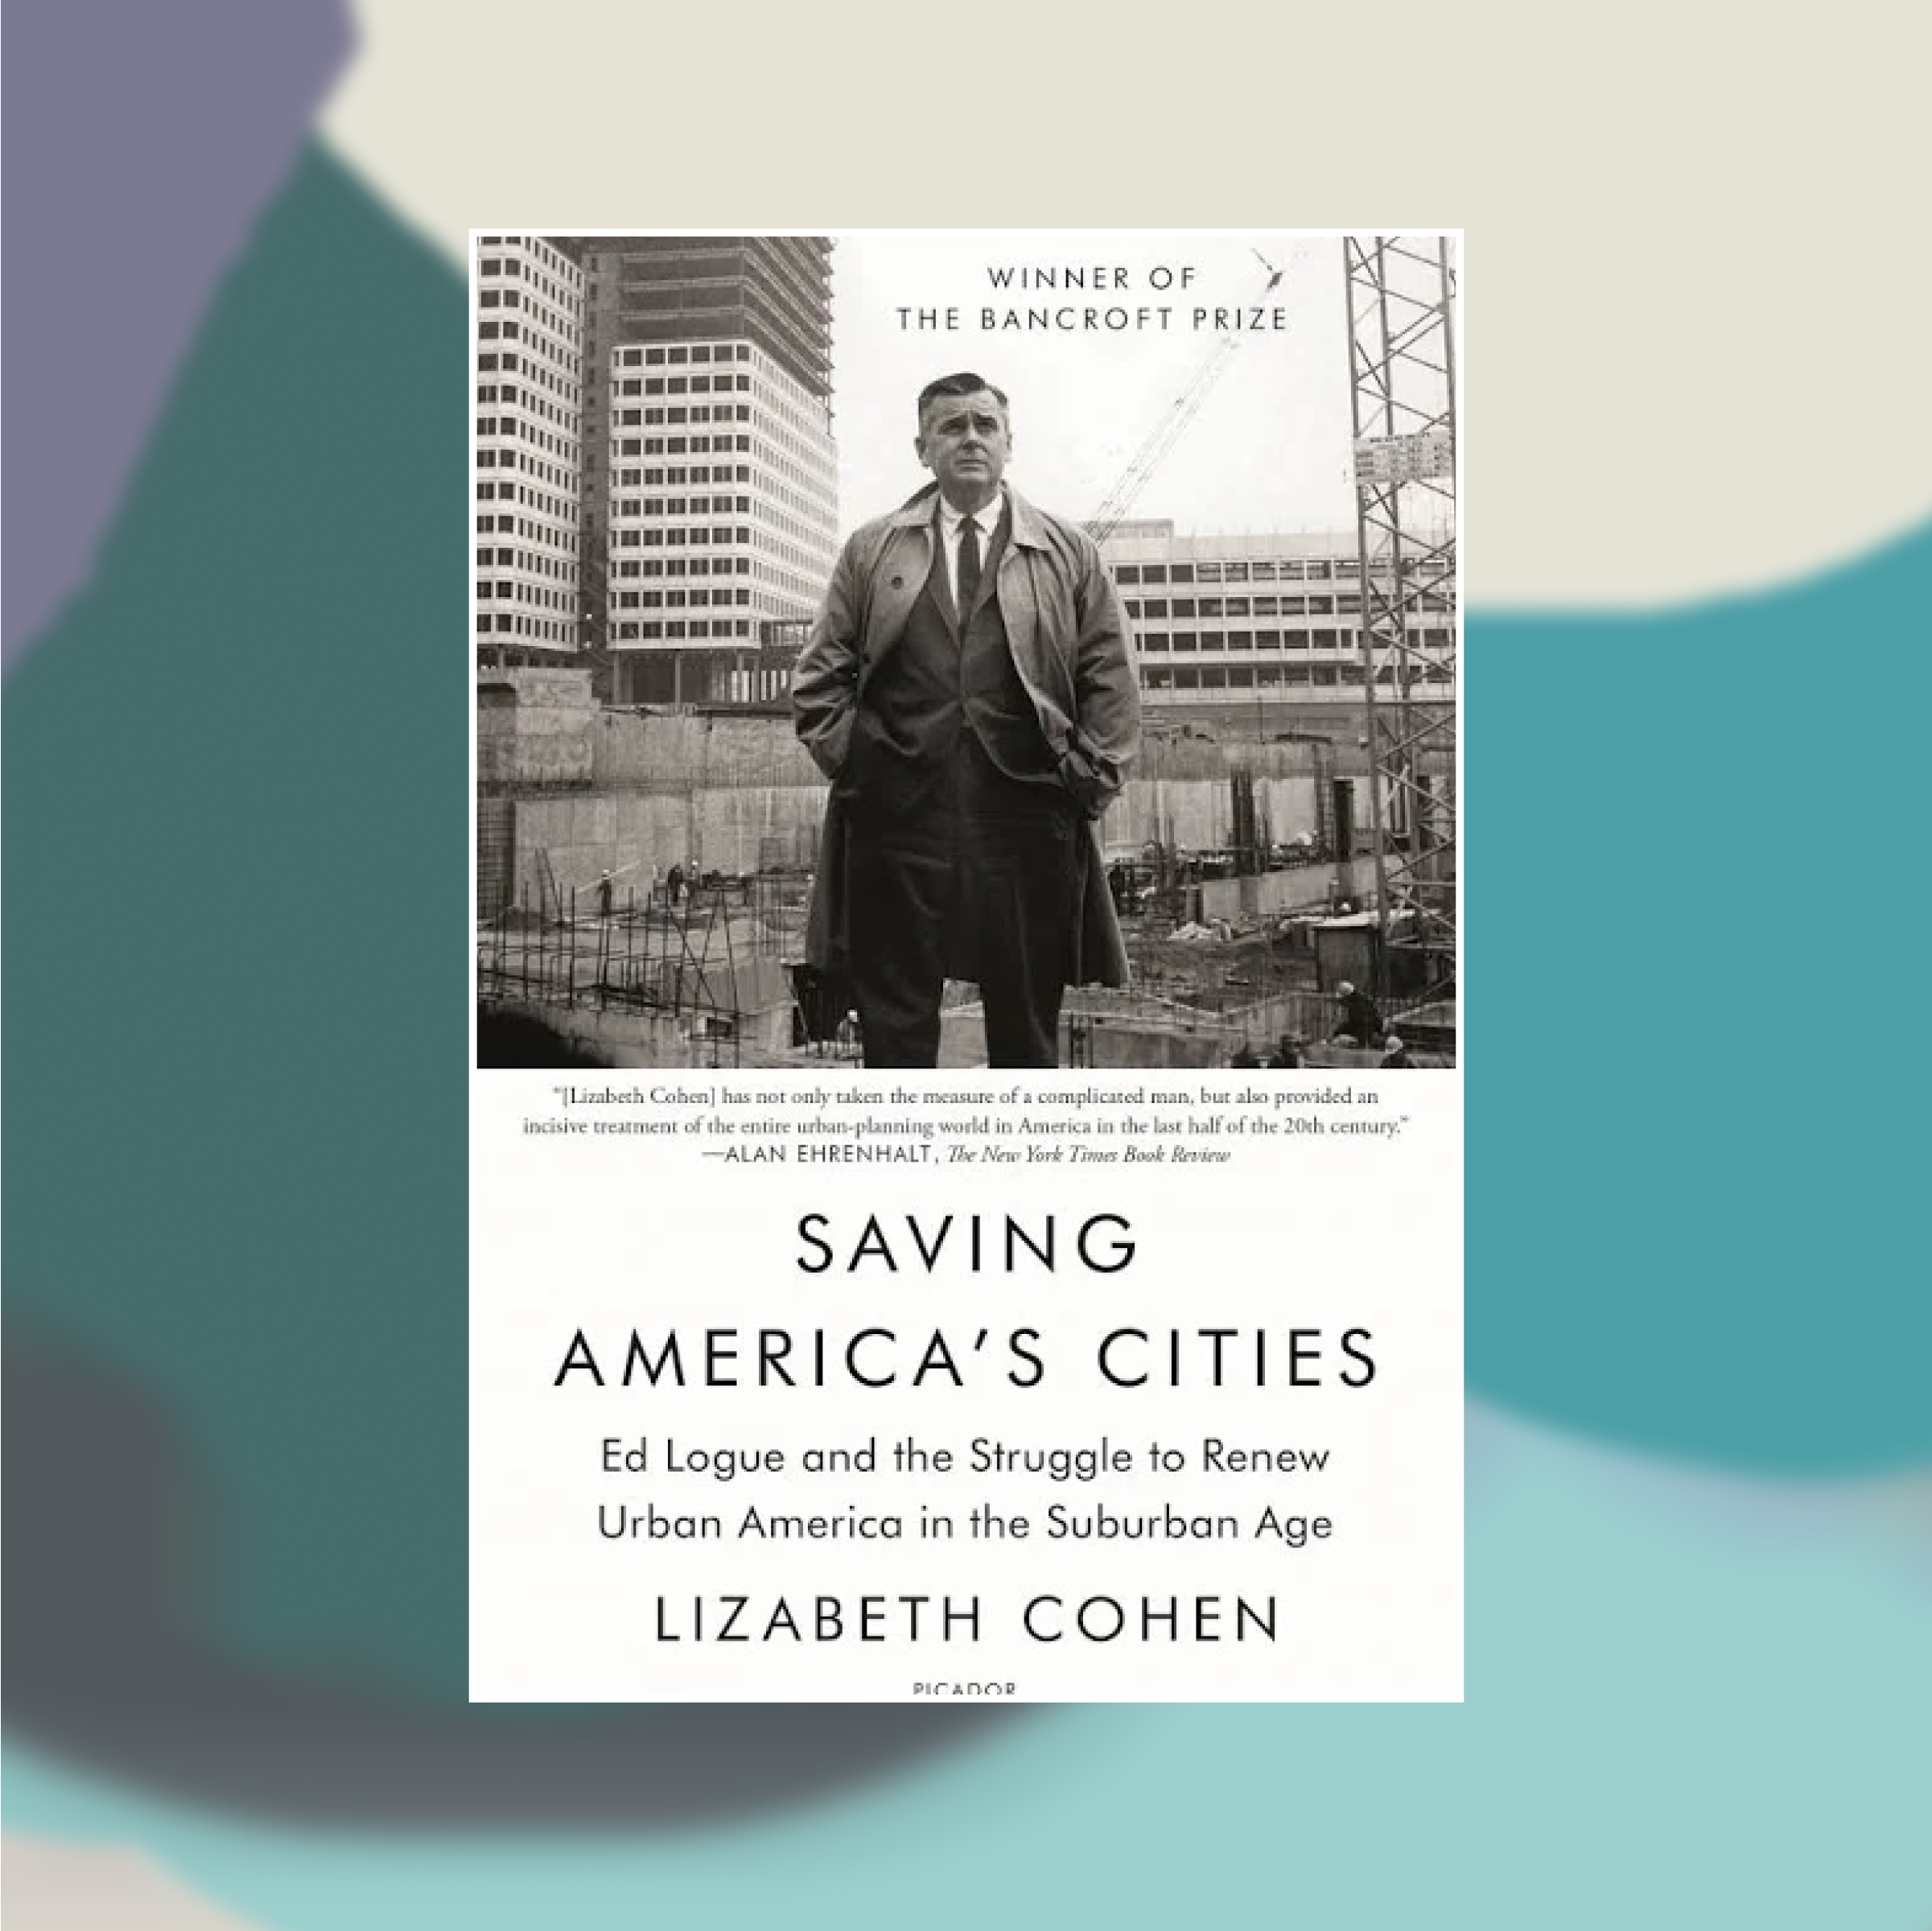 Book cover of Saving America's Cities against a painted background